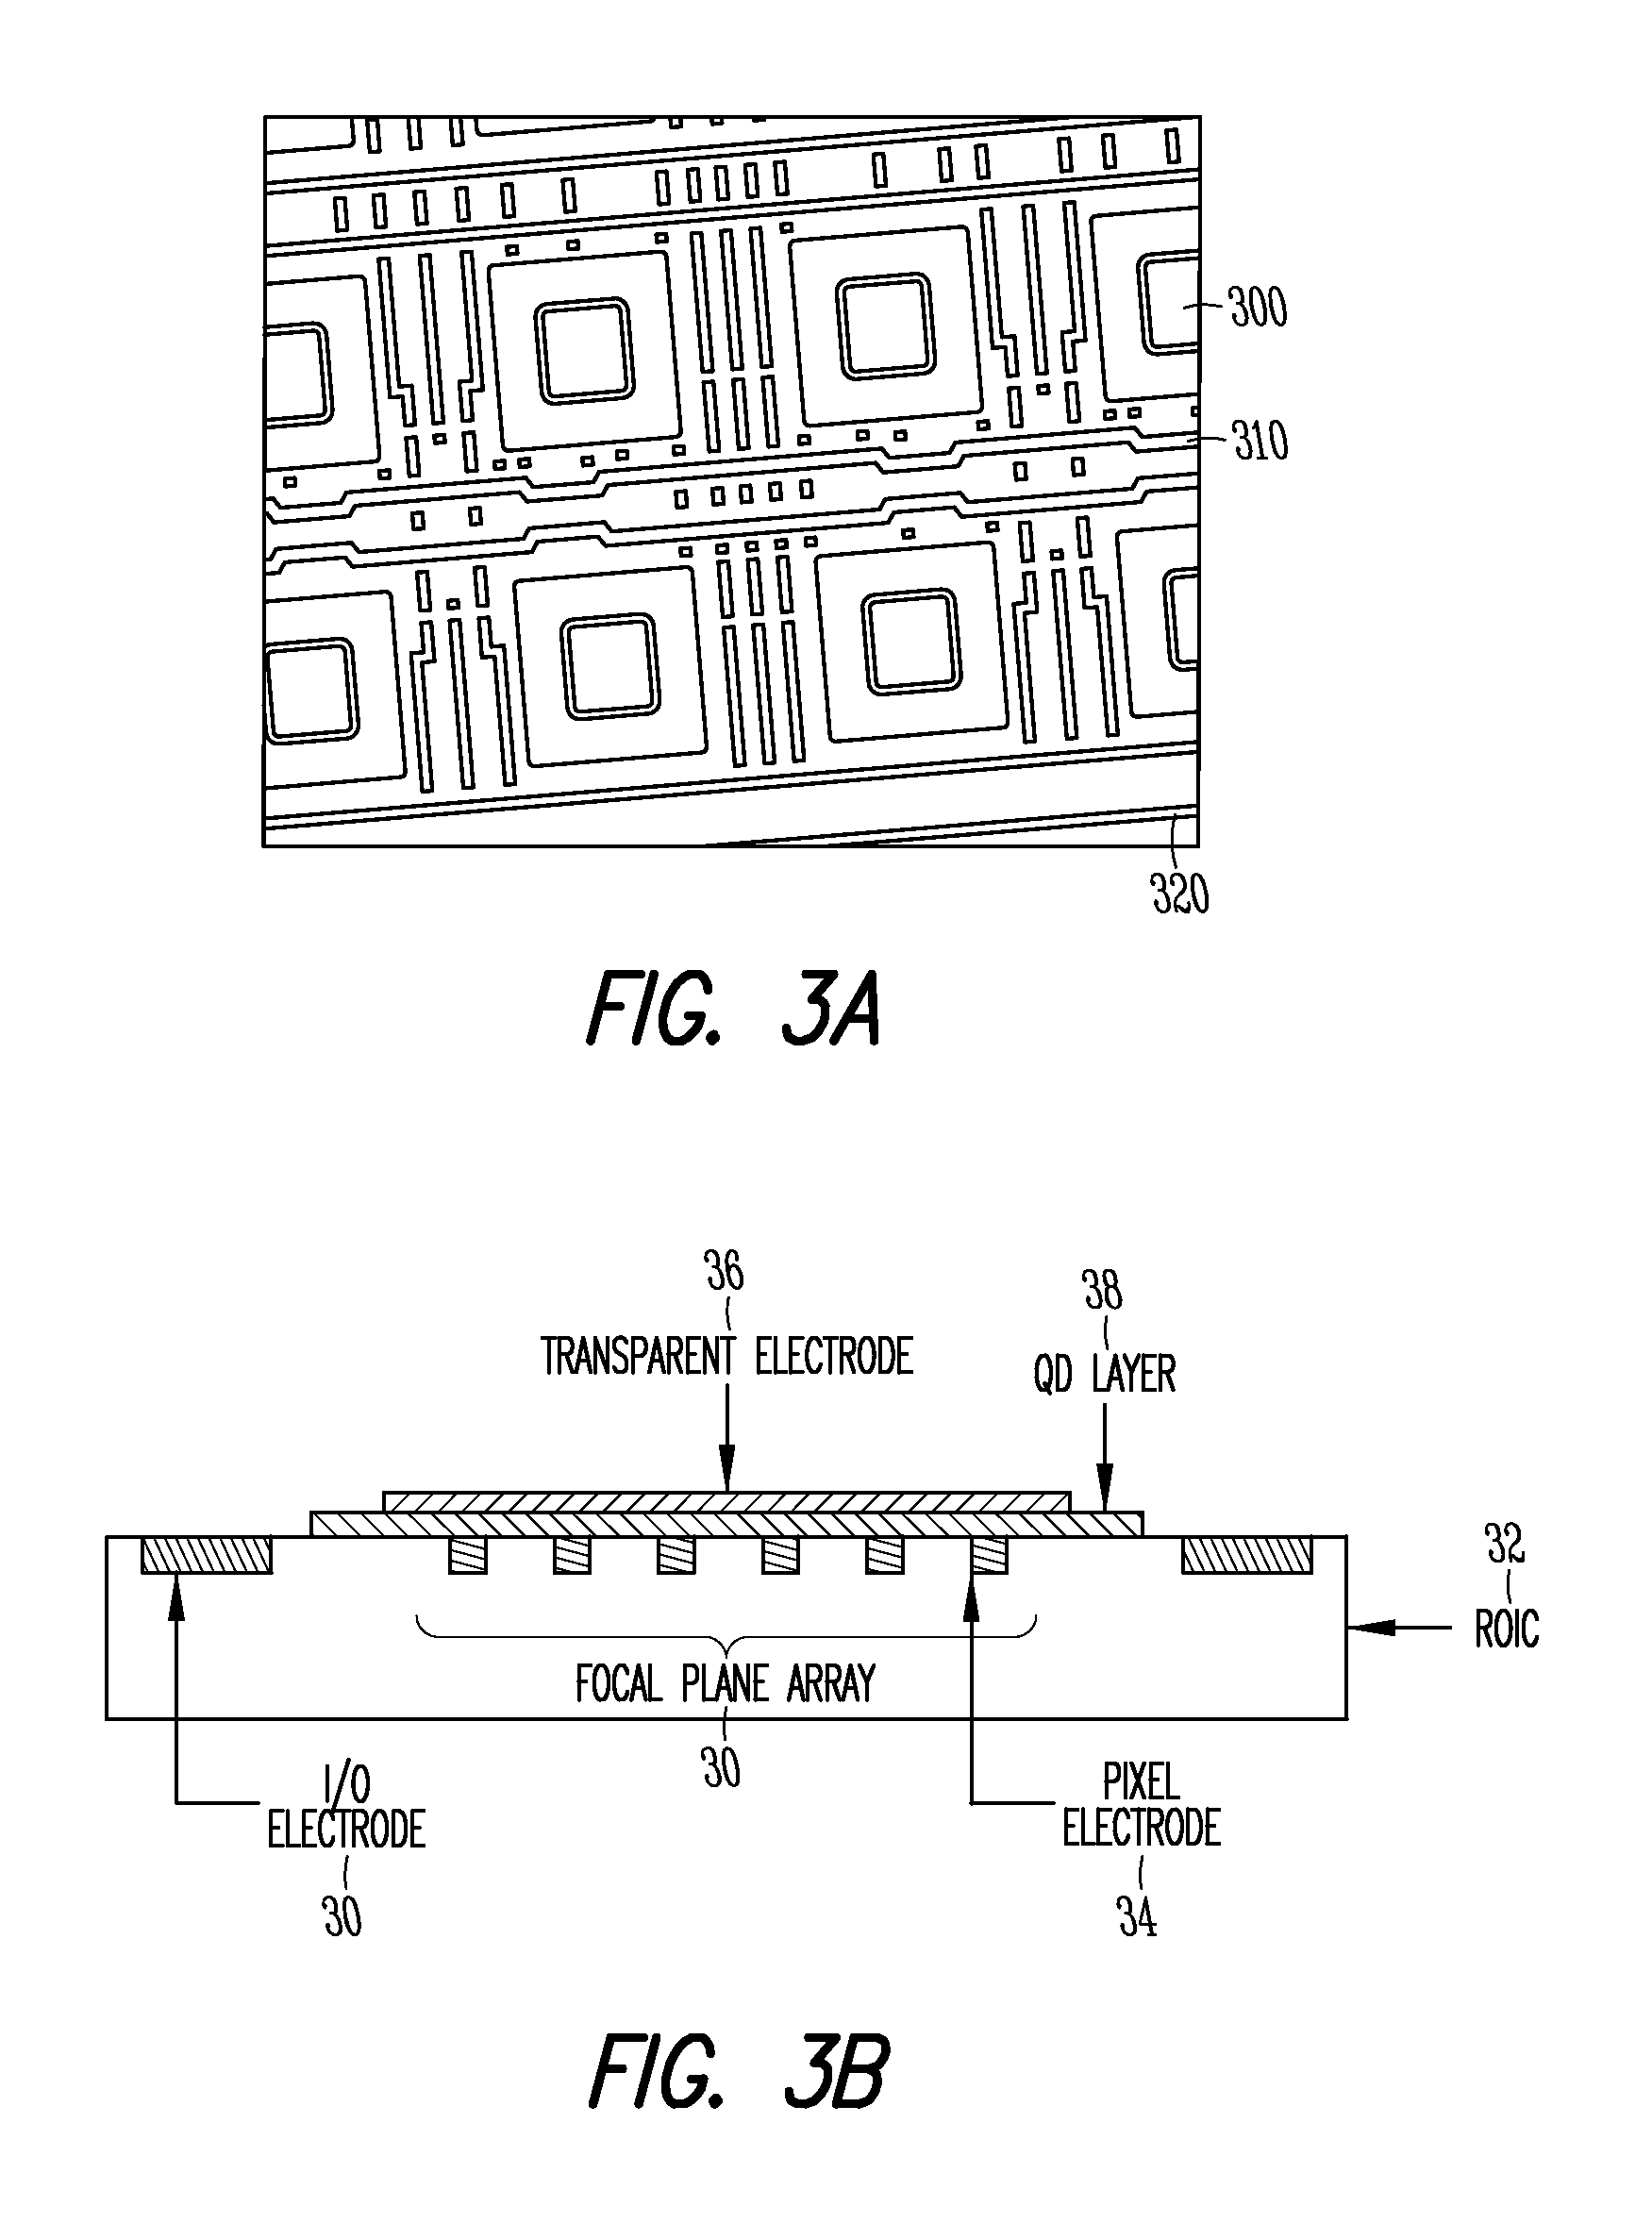 Quantum dot optical devices with enhanced gain and sensitivity and methods of making same